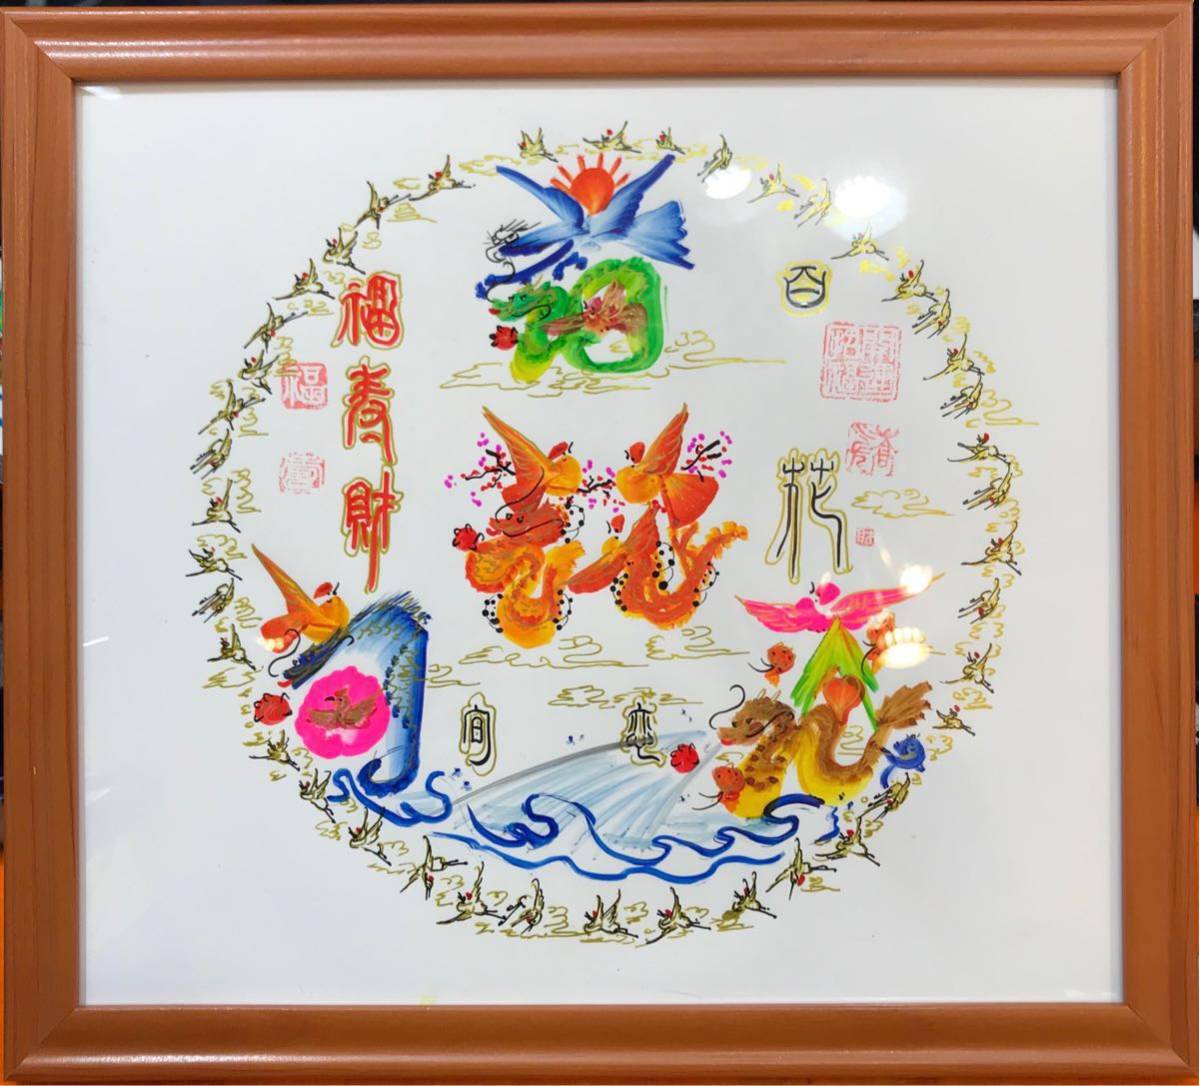  better fortune feng shui flower character, life name paper divination calligraphy, customer. name . write birthday rice .. calendar go in ... day finding employment present optimum festival pregnancy festival birth health length . feng shui flower character 